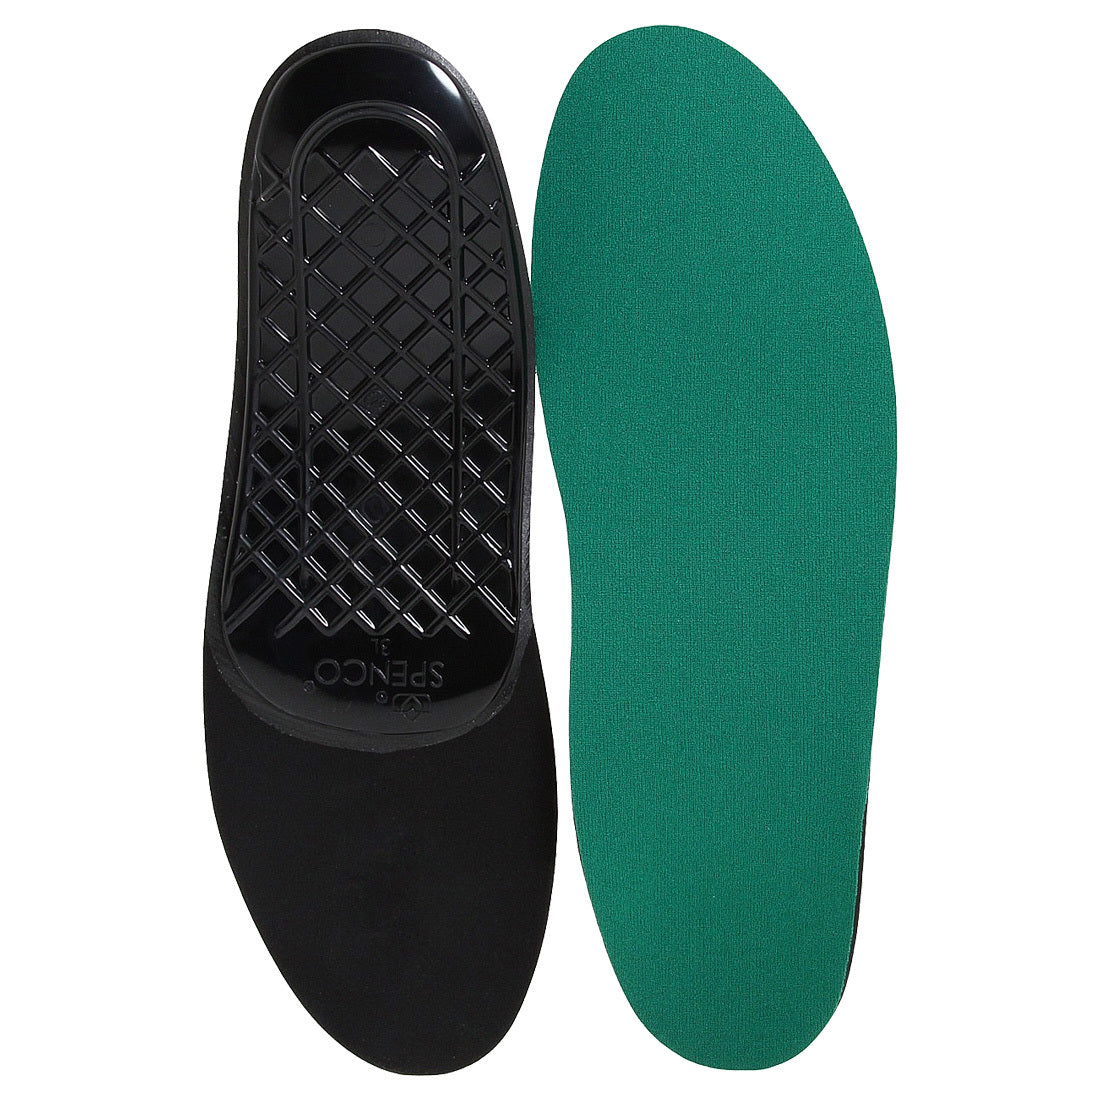 Spenco Orthotic Arch Supports Full Length